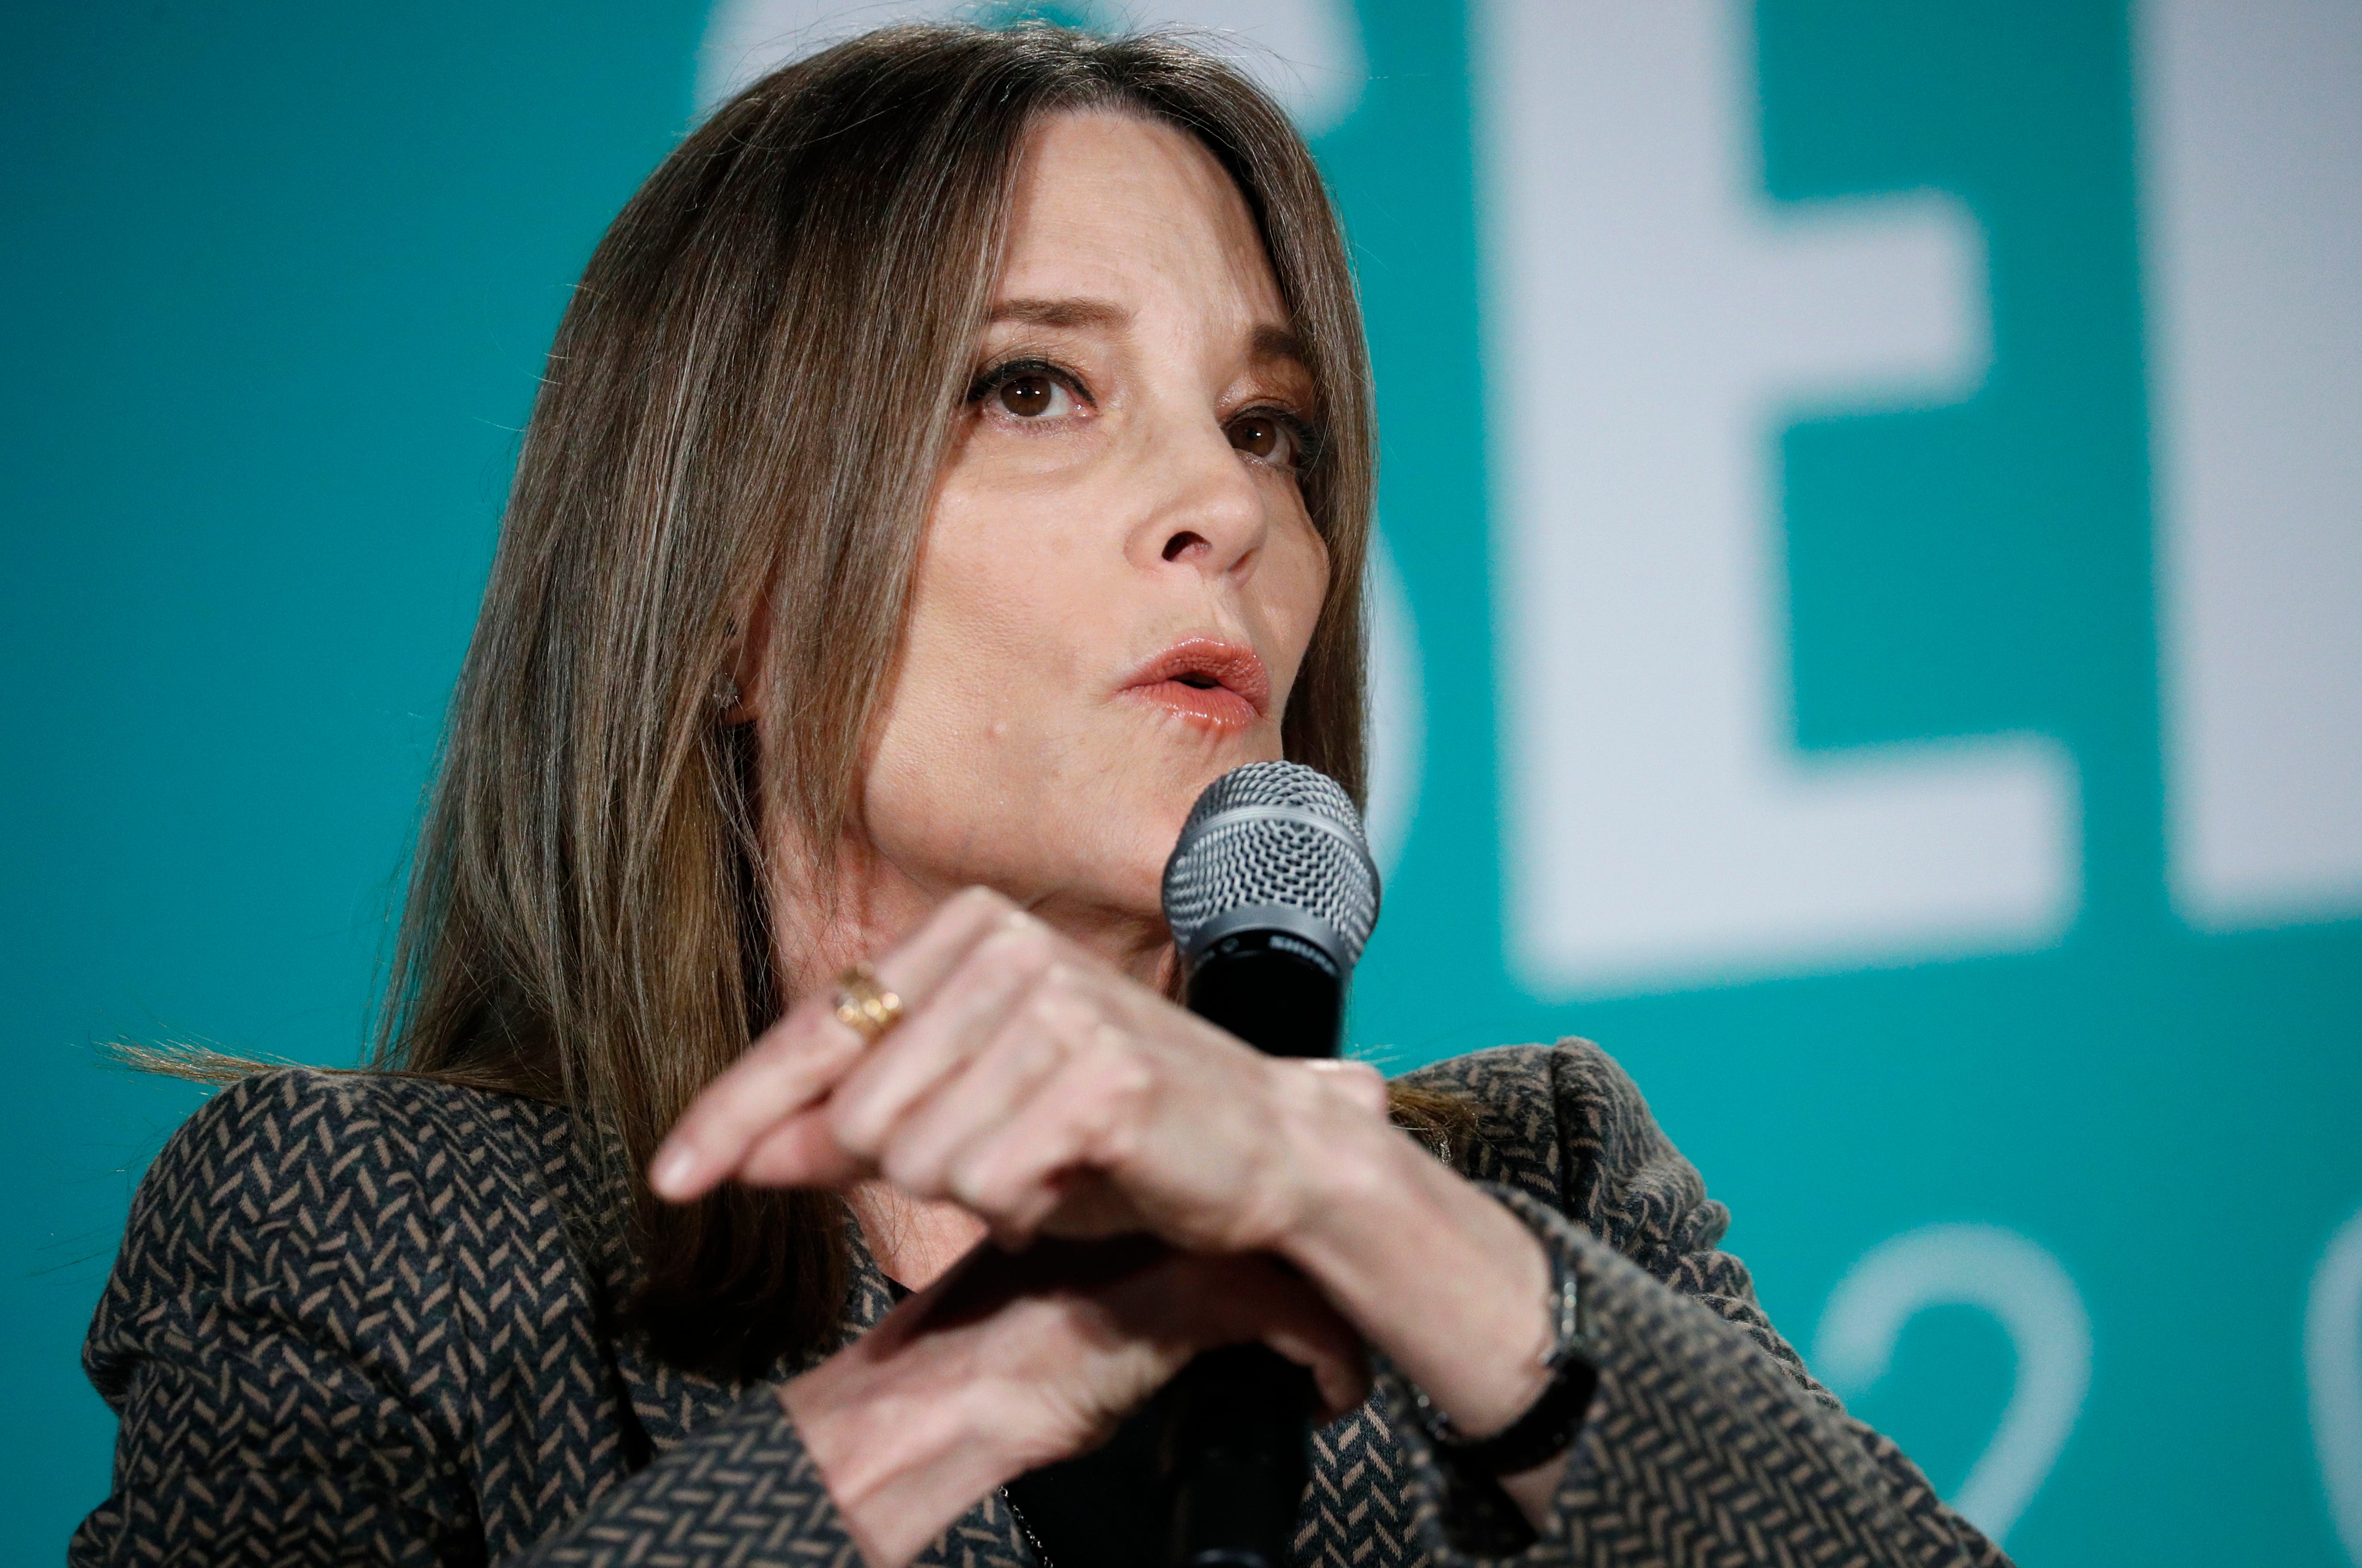 2020 Democratic presidential candidate Marianne Williamson to speak in Sparks on Thursday